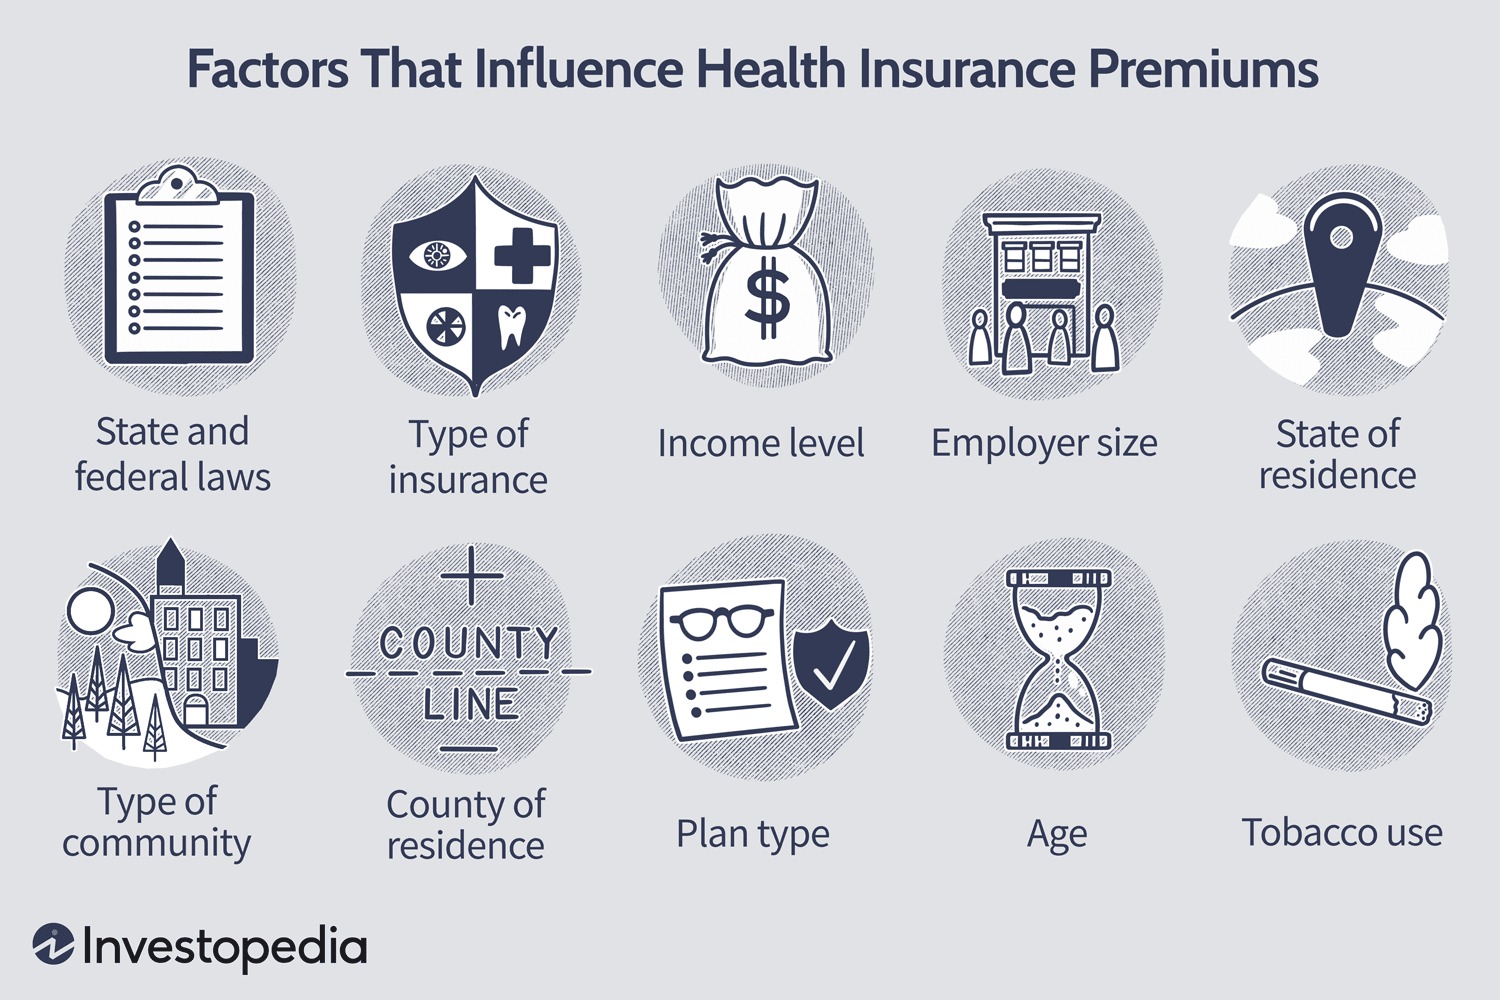 How Much Does Health Insurance Cost